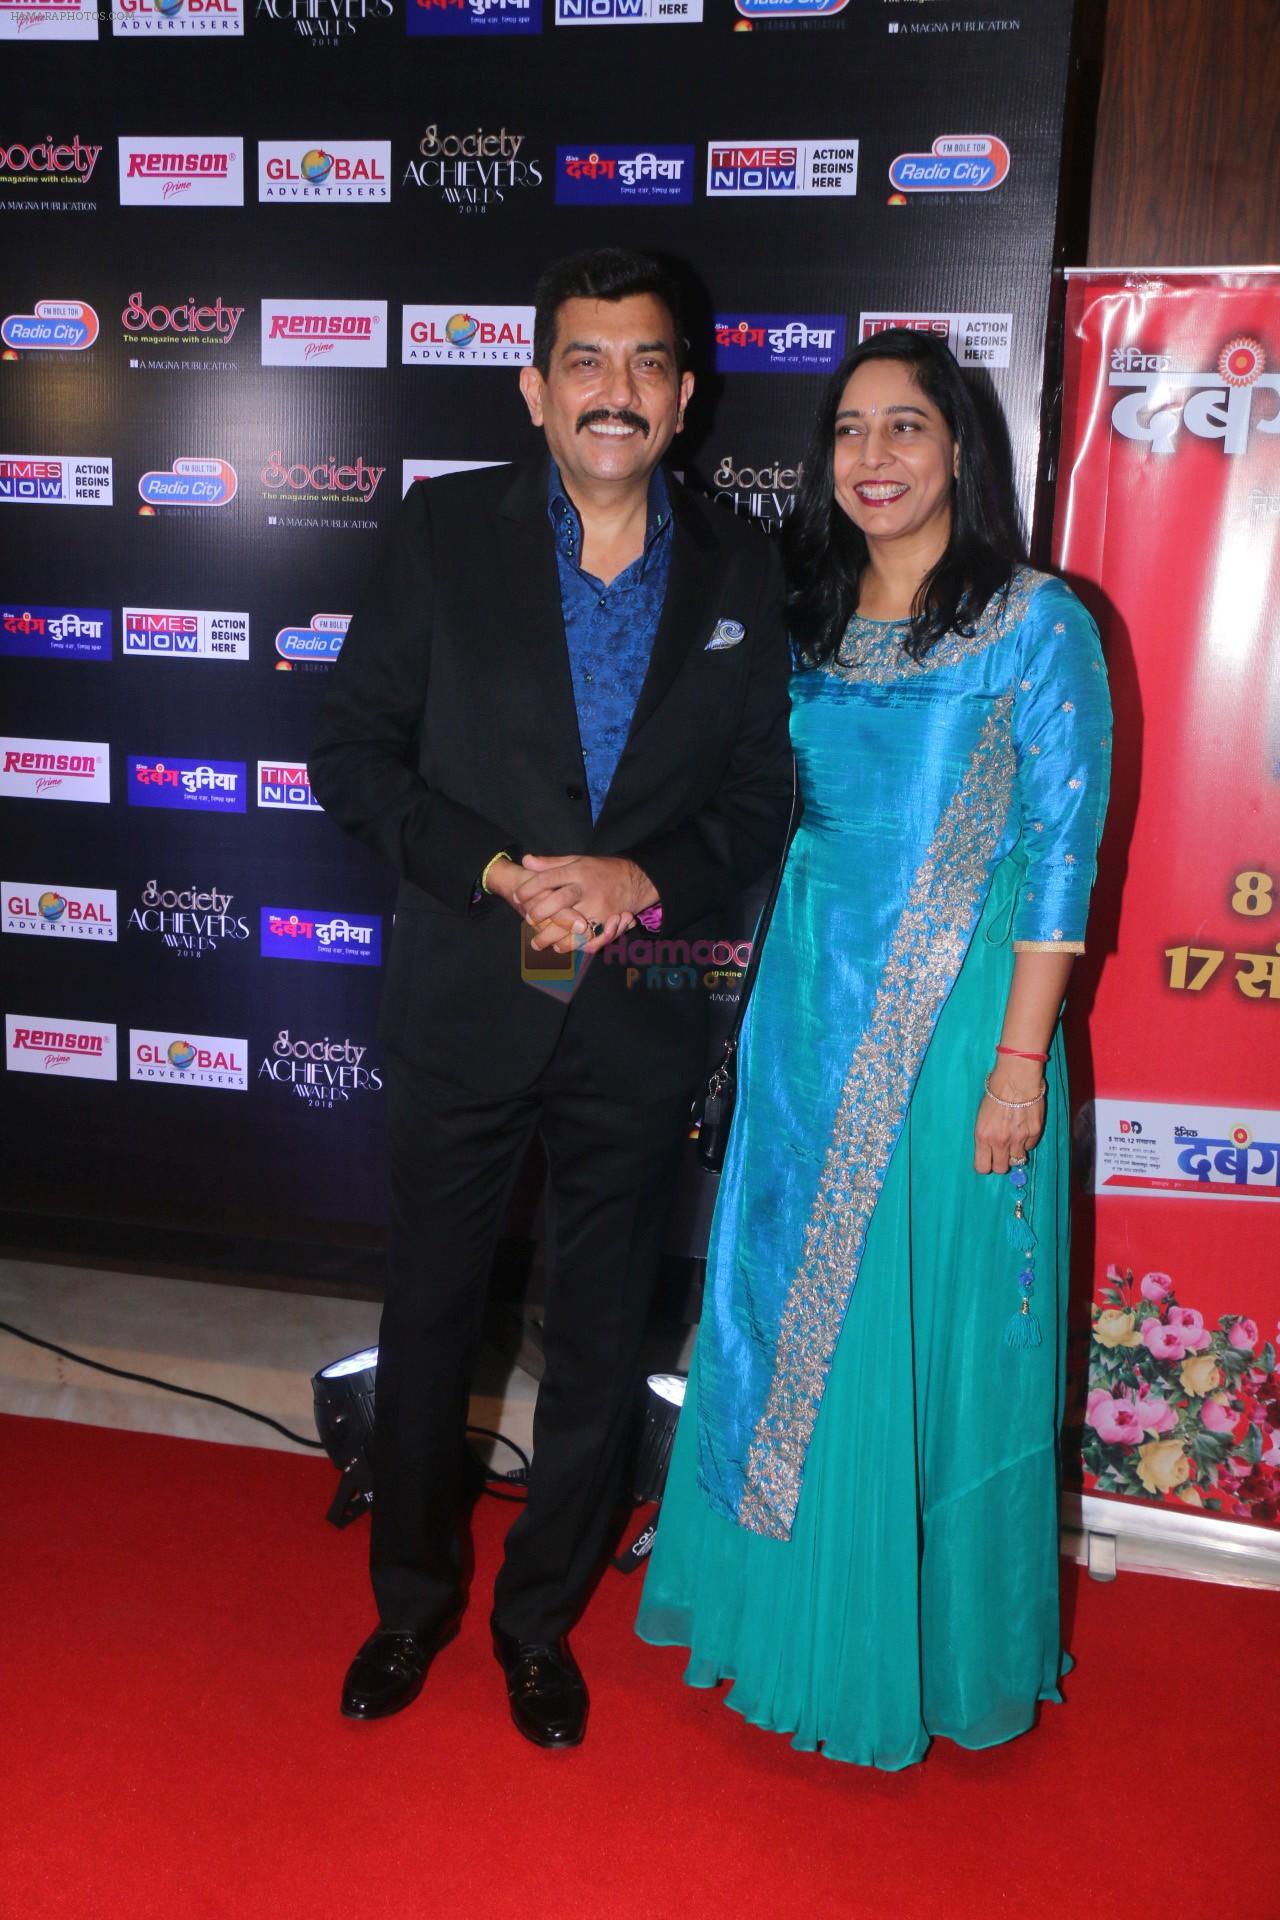 Sanjeev Kapoor attend Society Achievers Awards 2018 on 14th Jan 2018